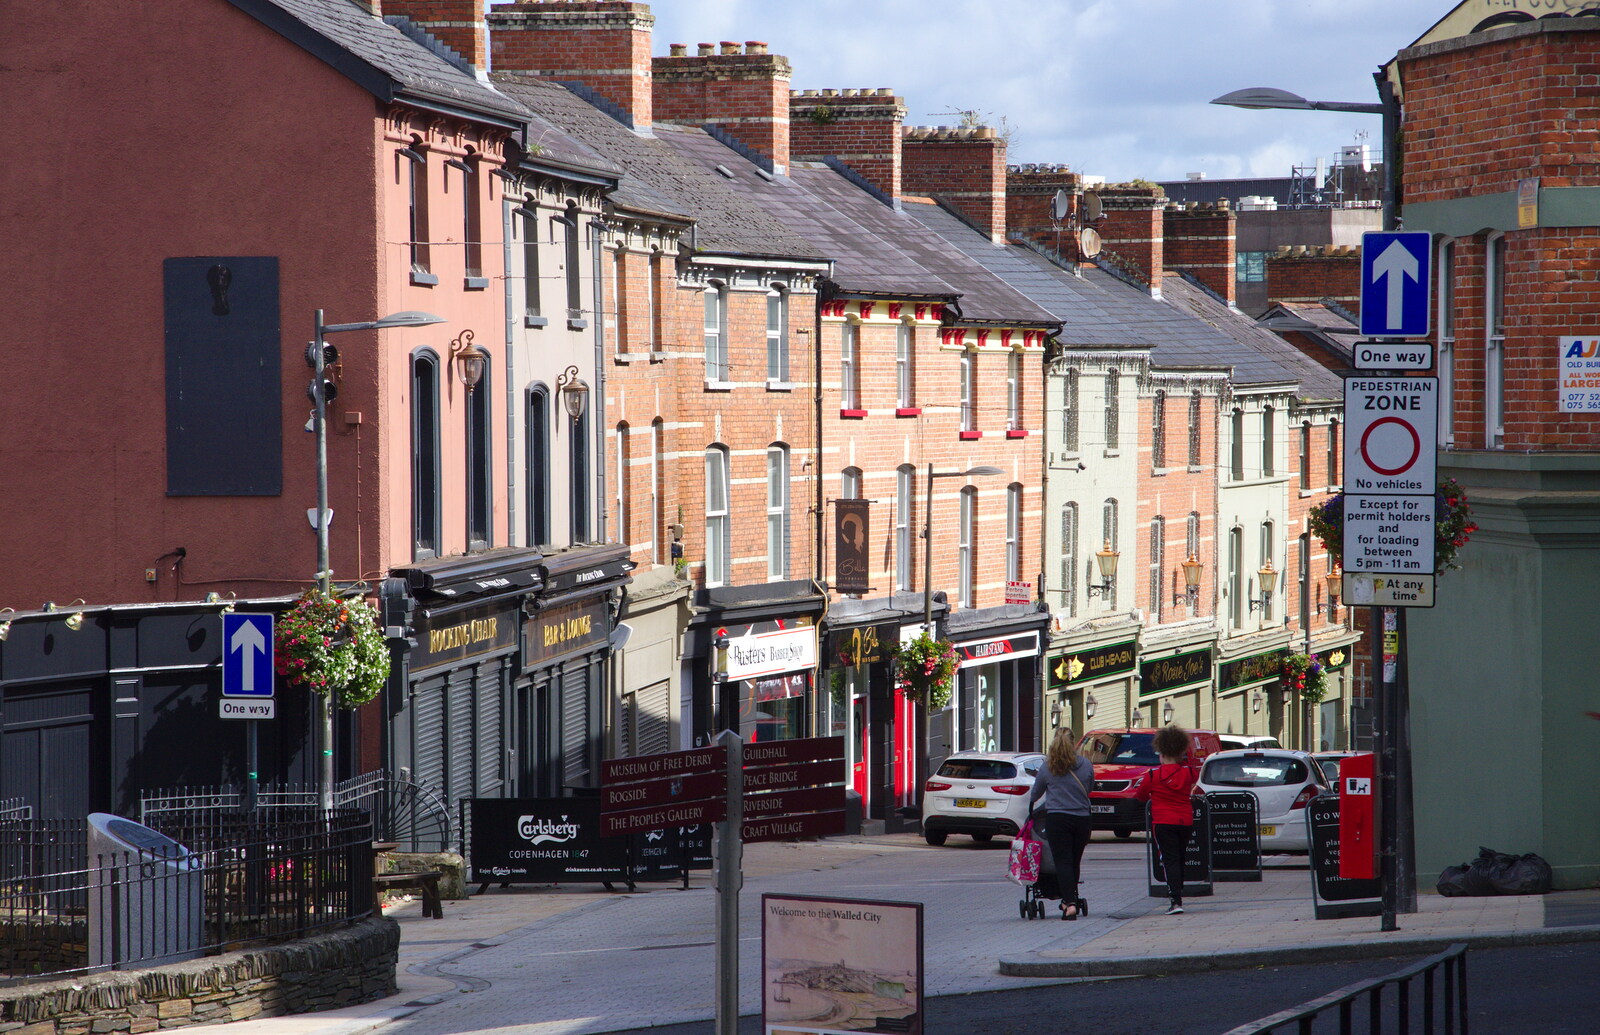 Waterloo Street in Derry from A Day in Derry, County Londonderry, Northern Ireland - 15th August 2019